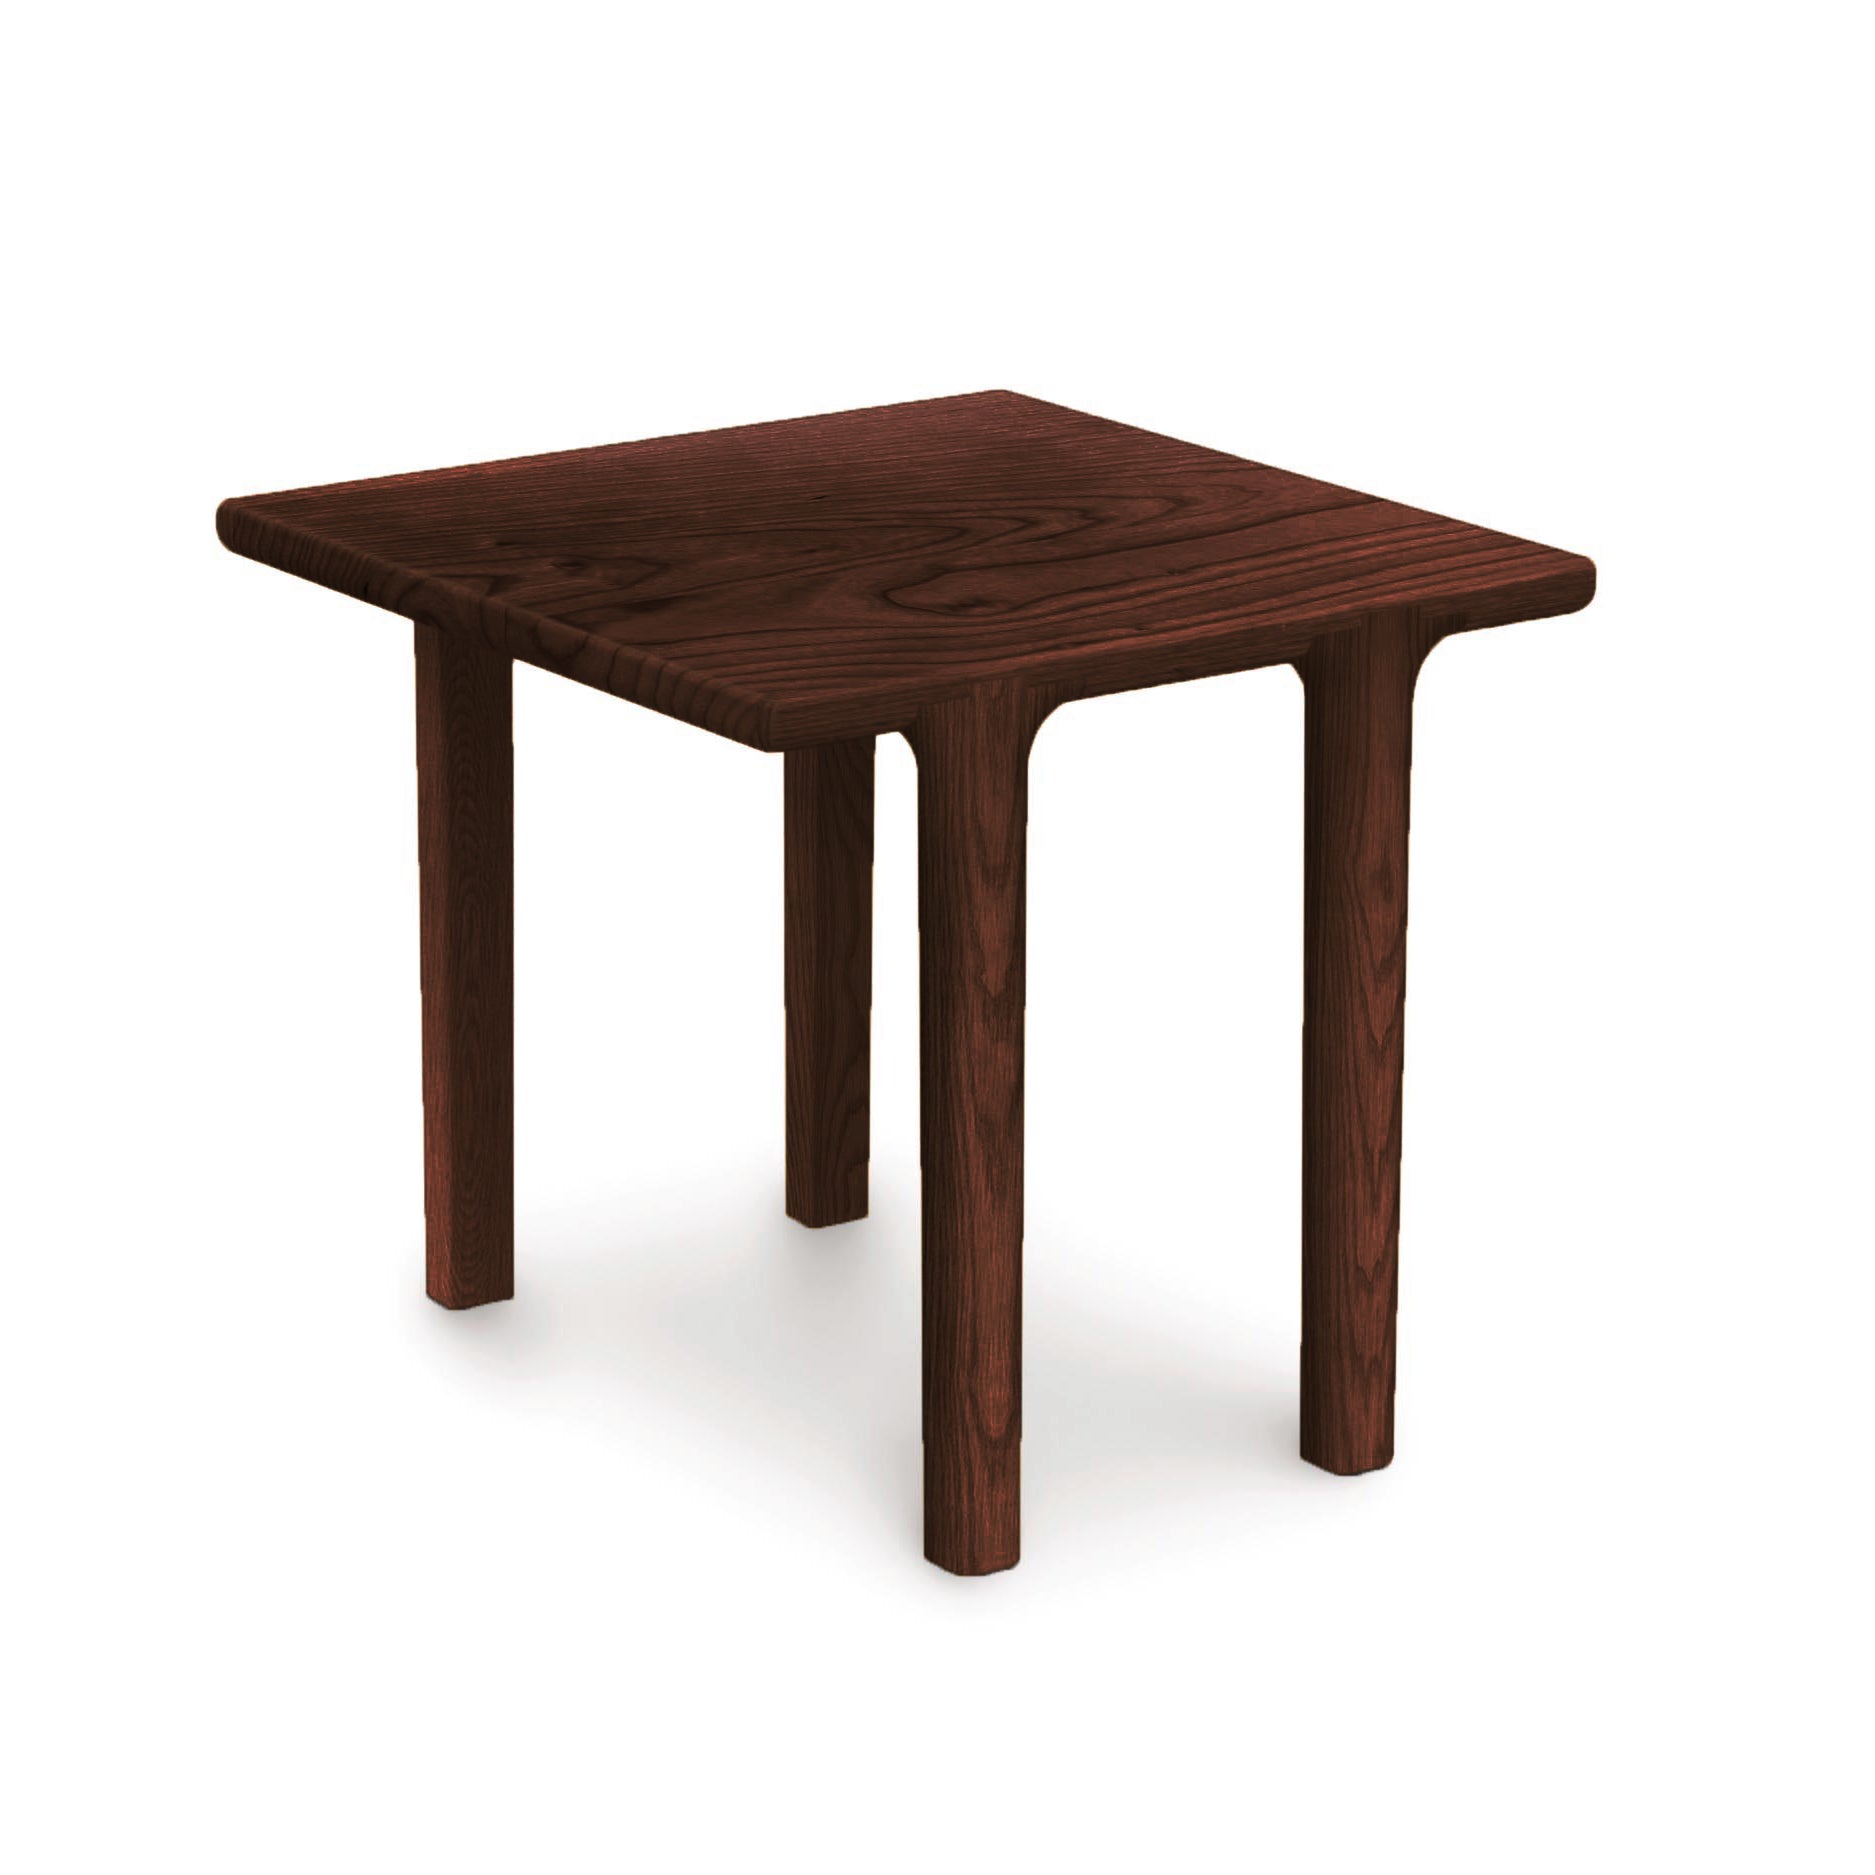 The Copeland Furniture Sierra Square End Table combines modern personality and North American hardwood into a sleek and stylish square table with a wooden top and two legs.